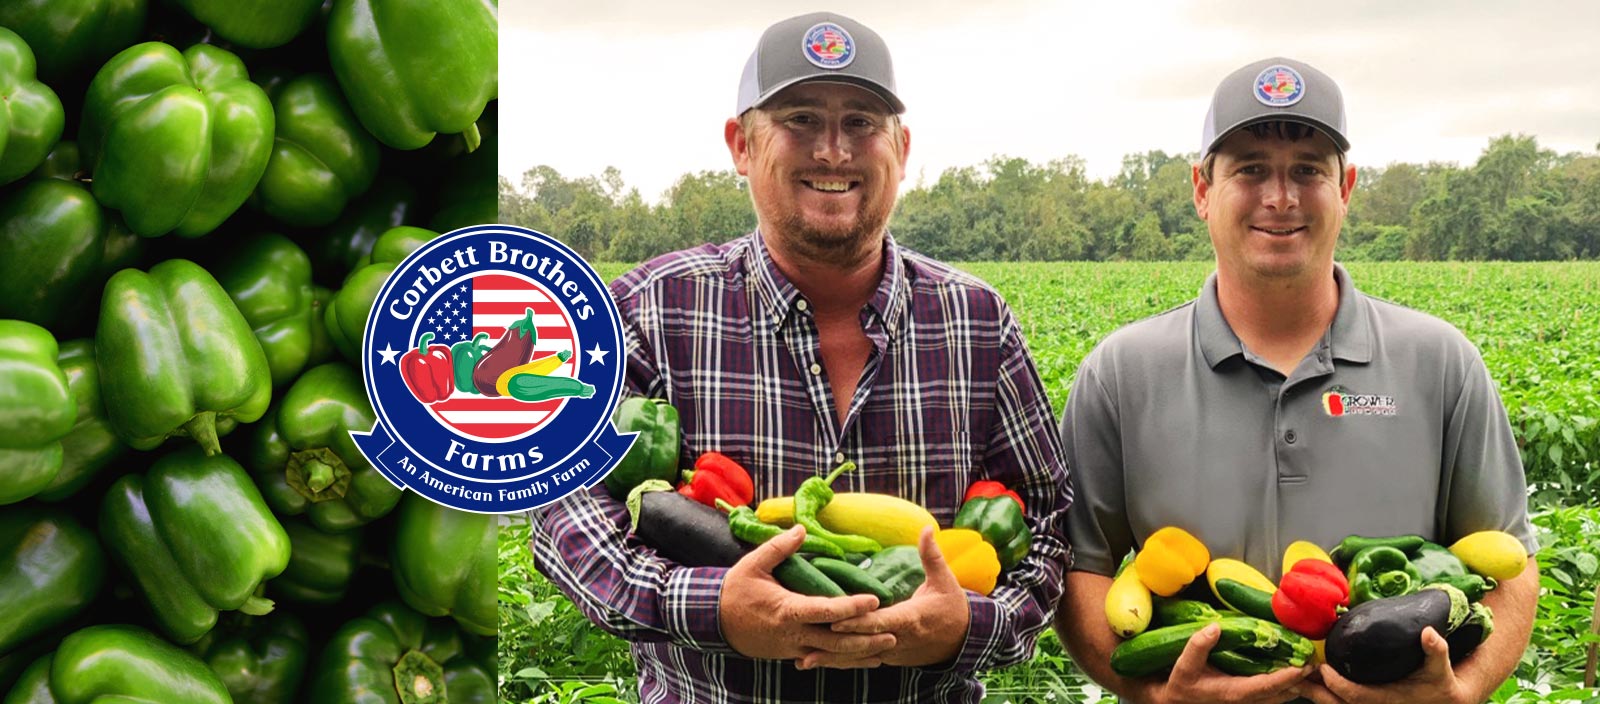 Corbett Brothers Farms - Home Page Header